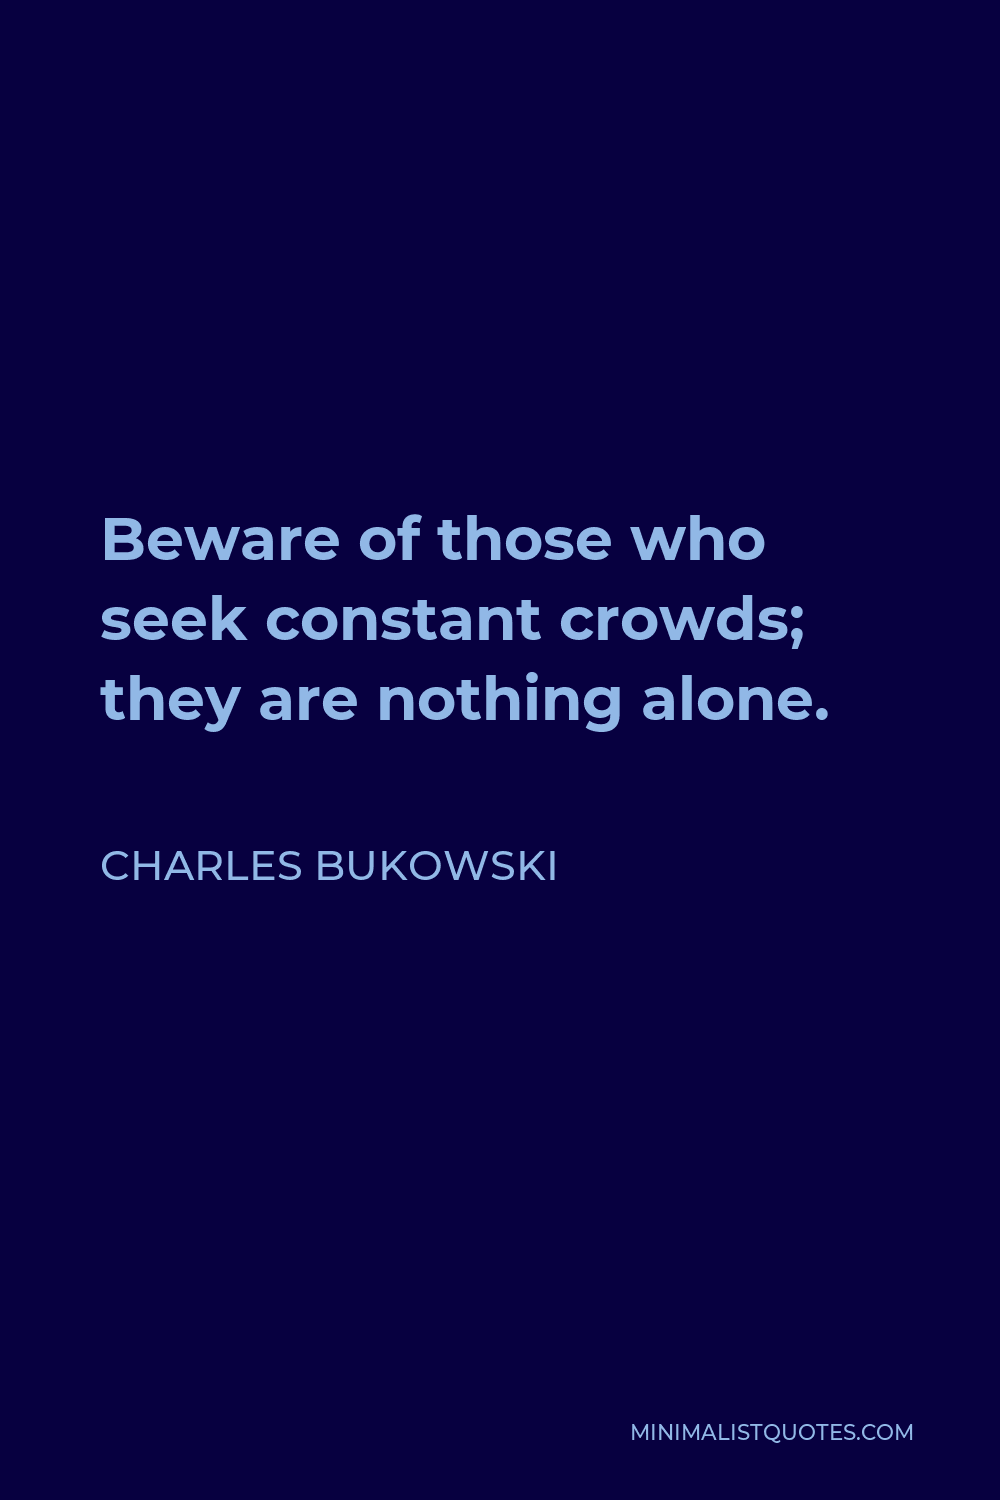 Charles Bukowski Quote - Beware of those who seek constant crowds; they are nothing alone.